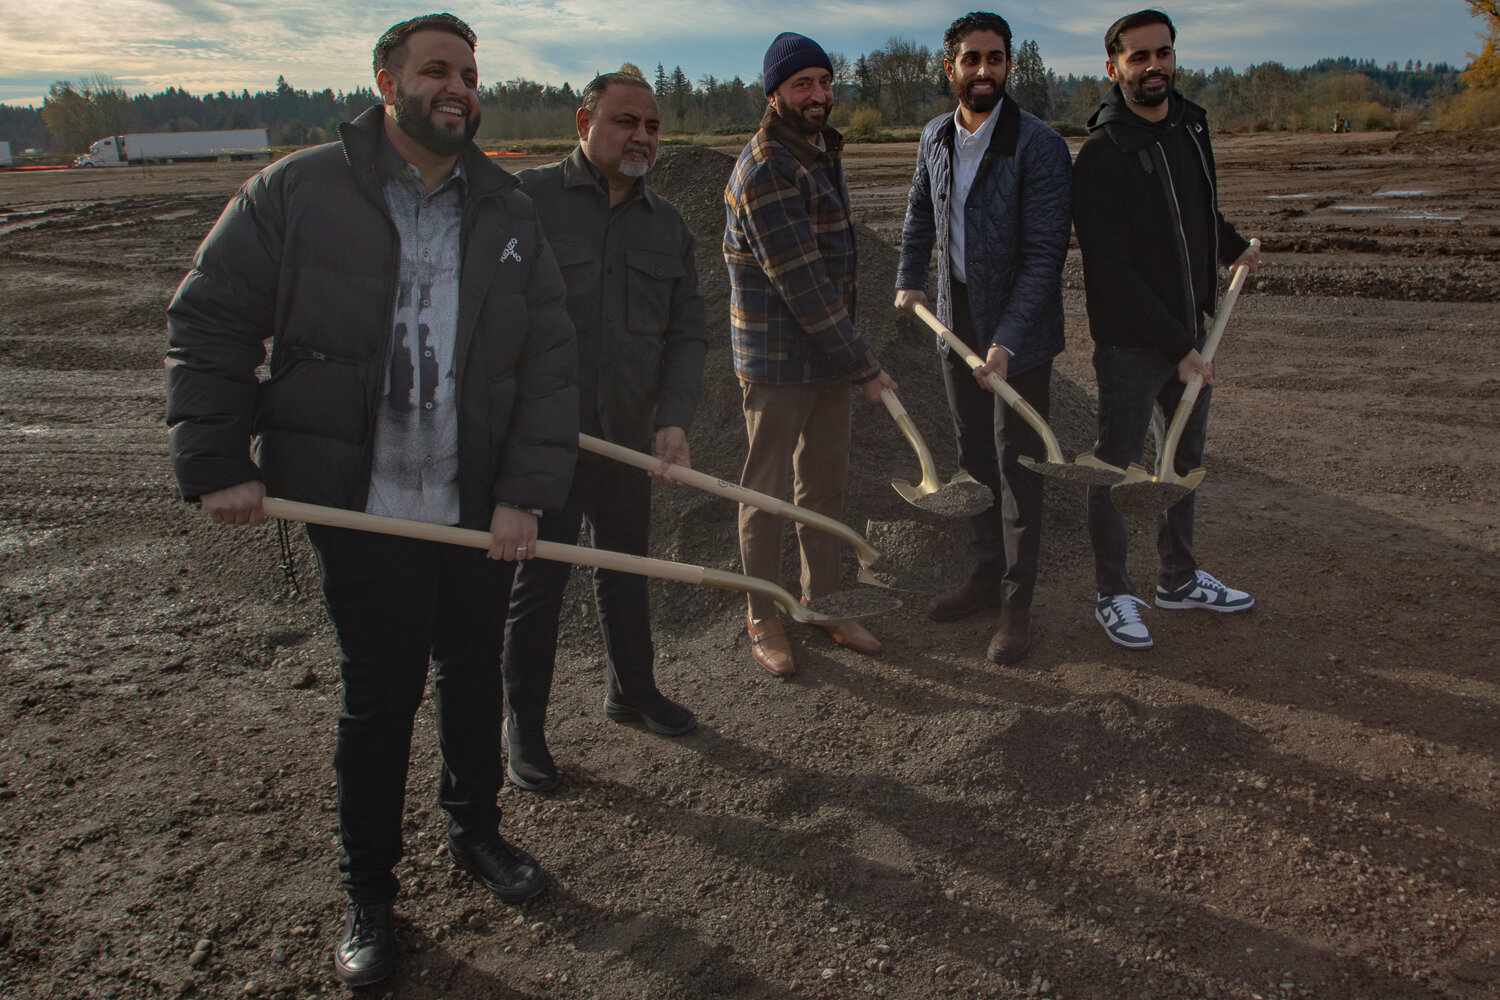 From the left, TA Napavine co-owner Damanjit Singh, Sukhdeep Multani, Inderjit Singh, TA Napavine co-owner Gurinderjit Sidhu, TA Napavine co-owner Manpreet Singh post for a photo during a ceremonial groundbreaking event for a new TA truck stop in Napavine held on Nov. 21 on 121 Hamilton Rd.